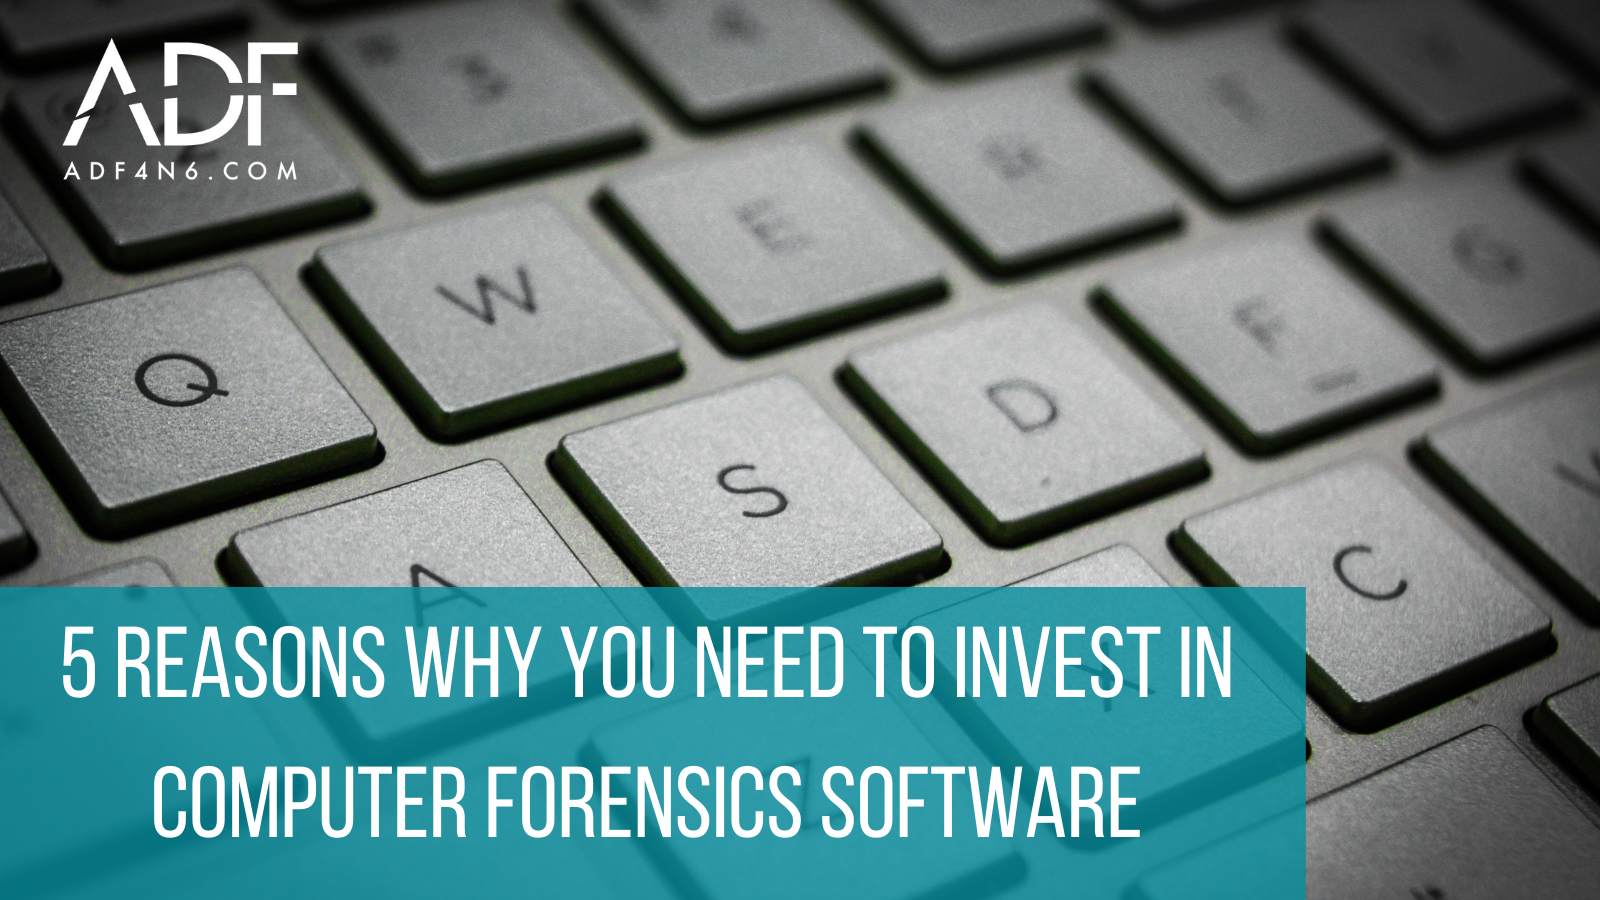 5 Reasons Why You Need to Invest in Computer Forensics Software